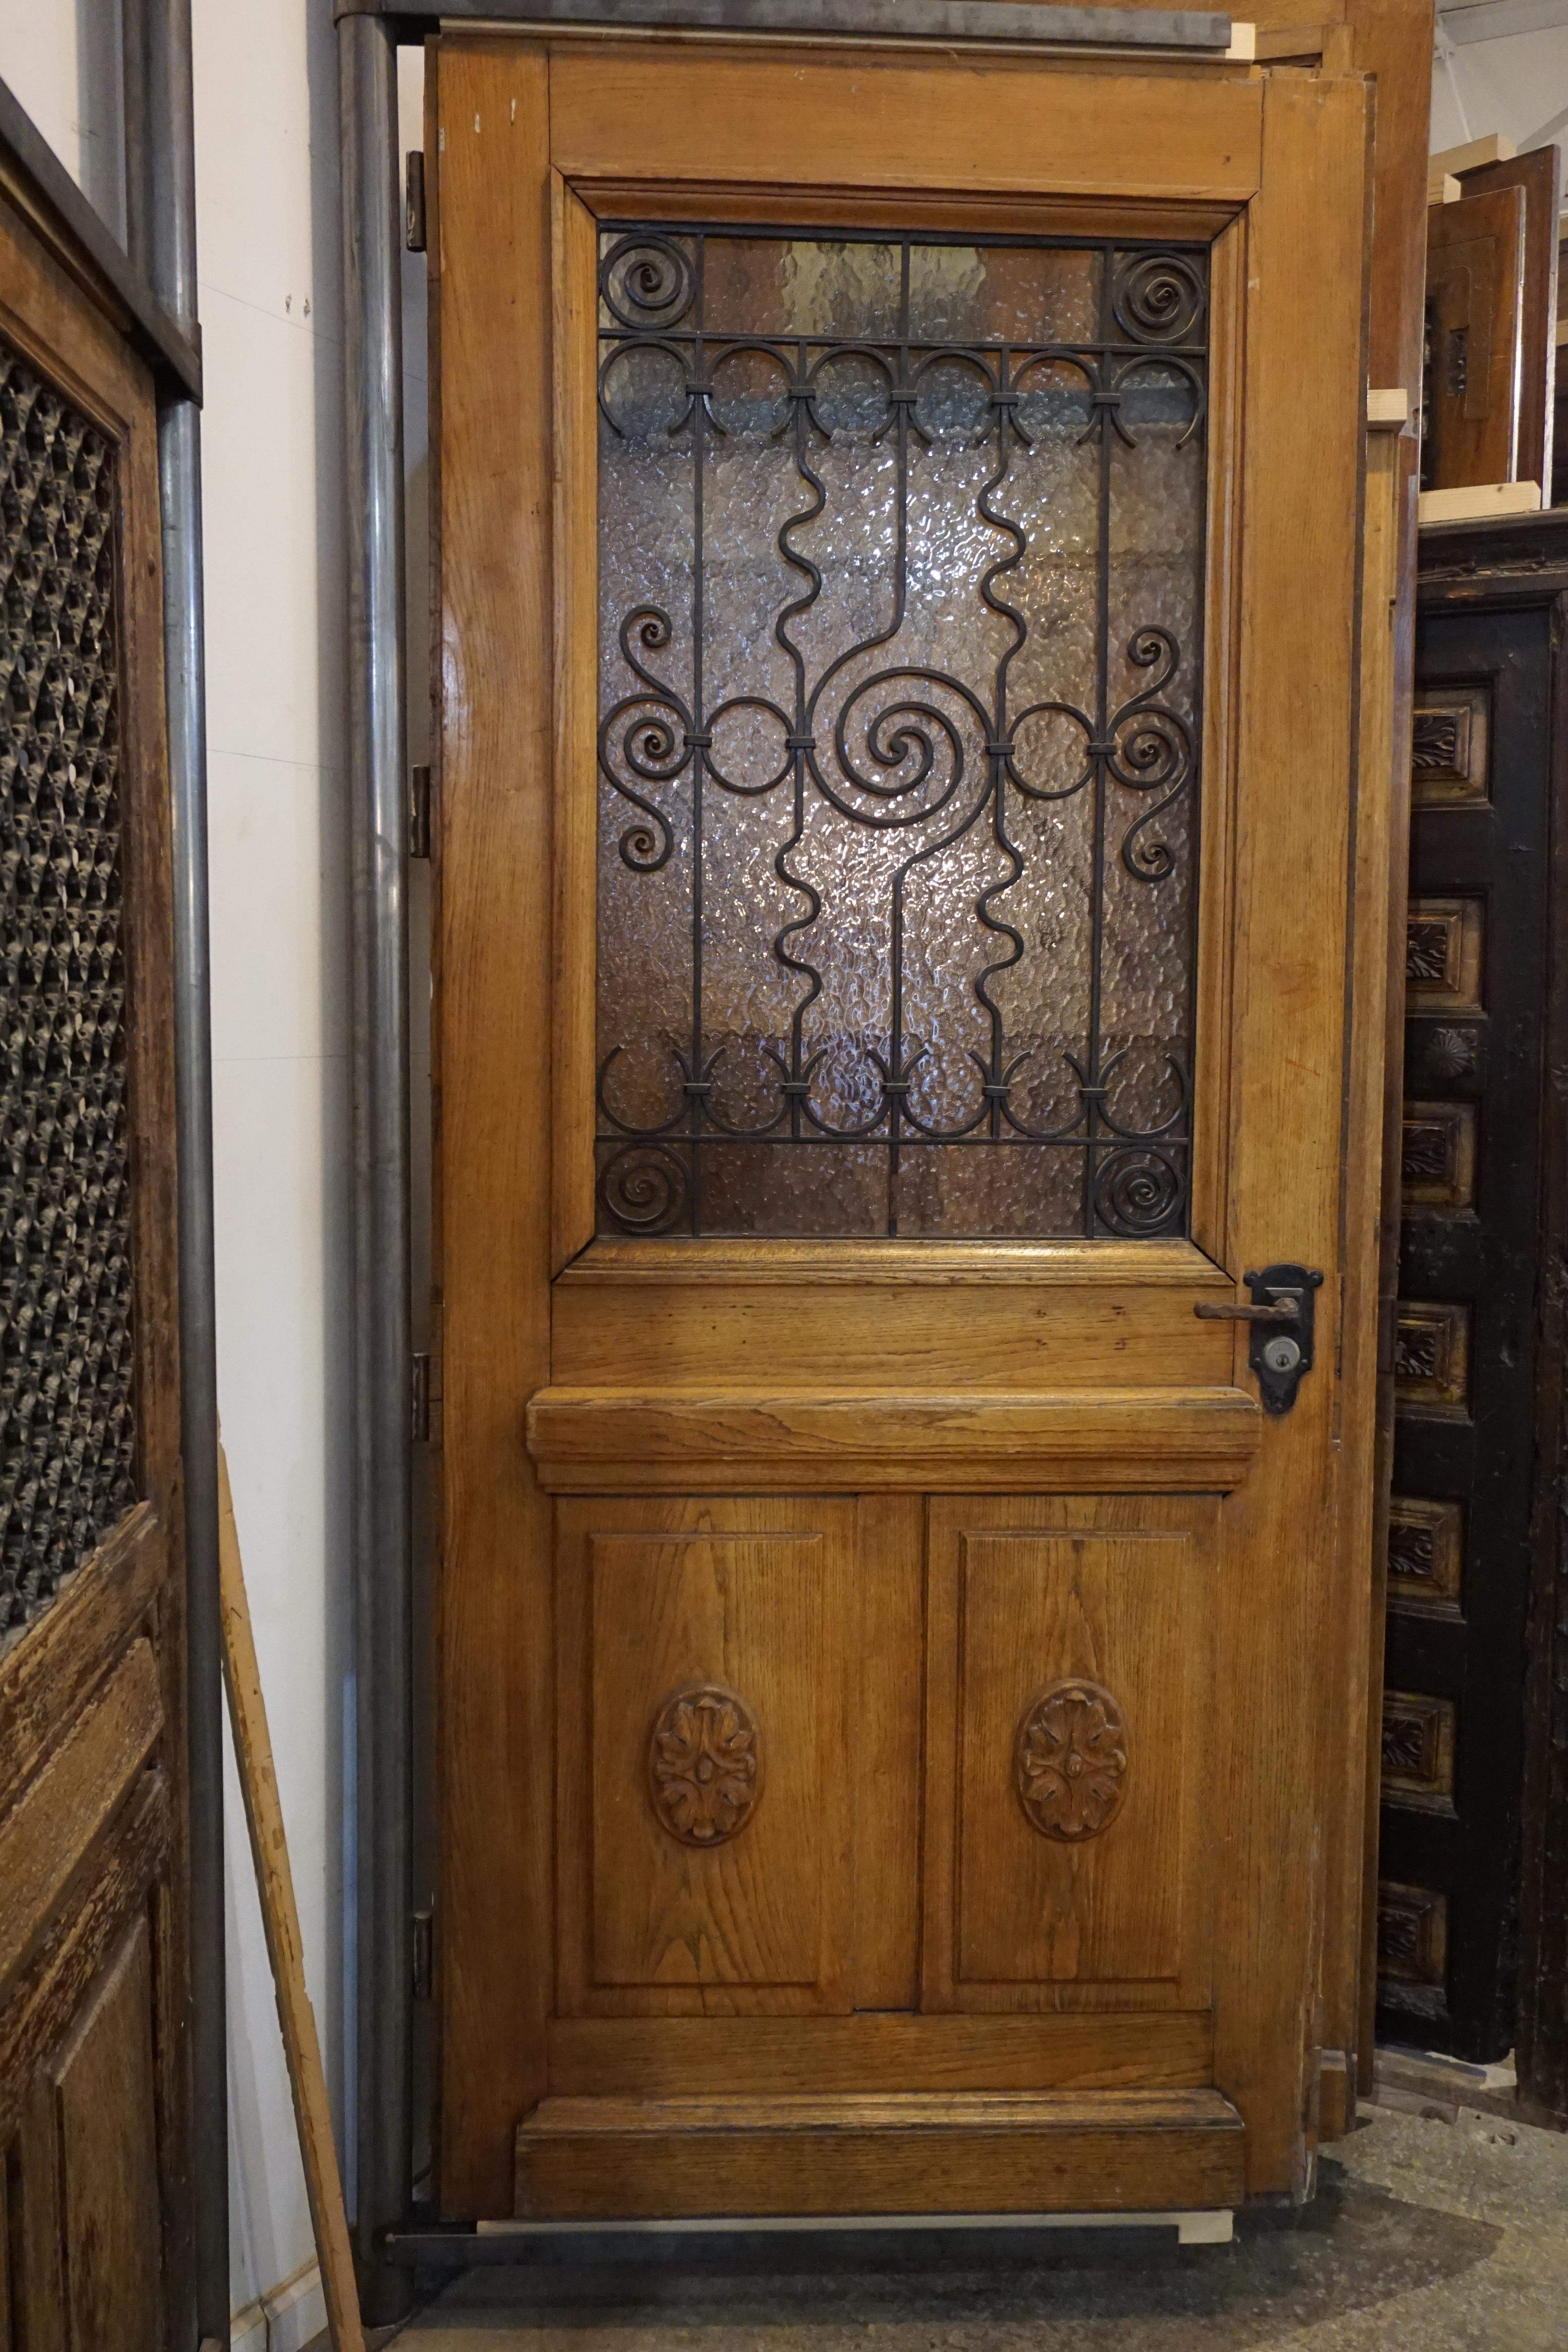 French oak entry door with ornate ironwork grille and lever handle. Applied rosettes to bottom panels.

Origin: France, circa 1890

Measurements: 41 1/4